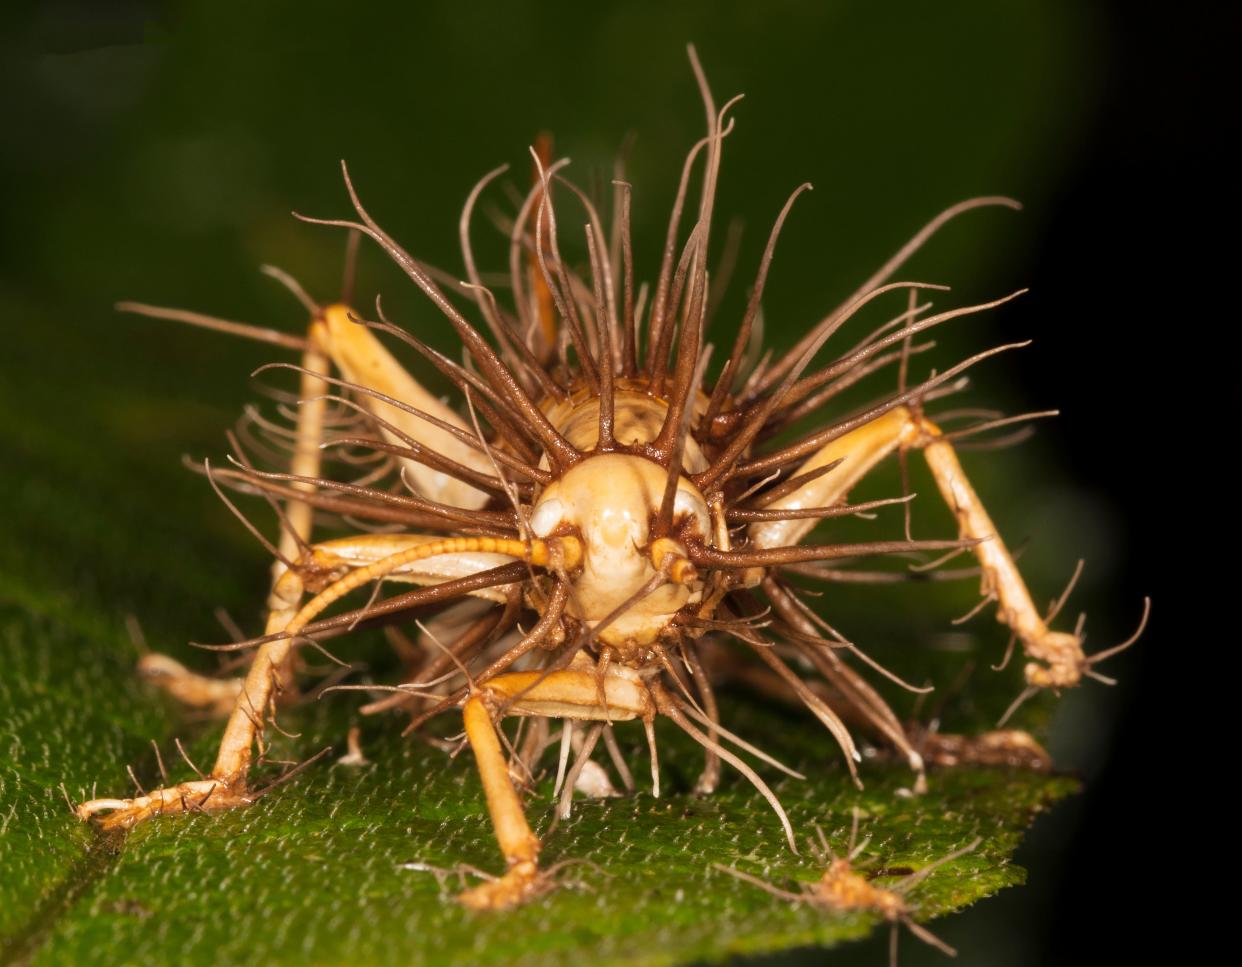 A Carolina leafroller cricket bristles with fungal fruiting bodies.